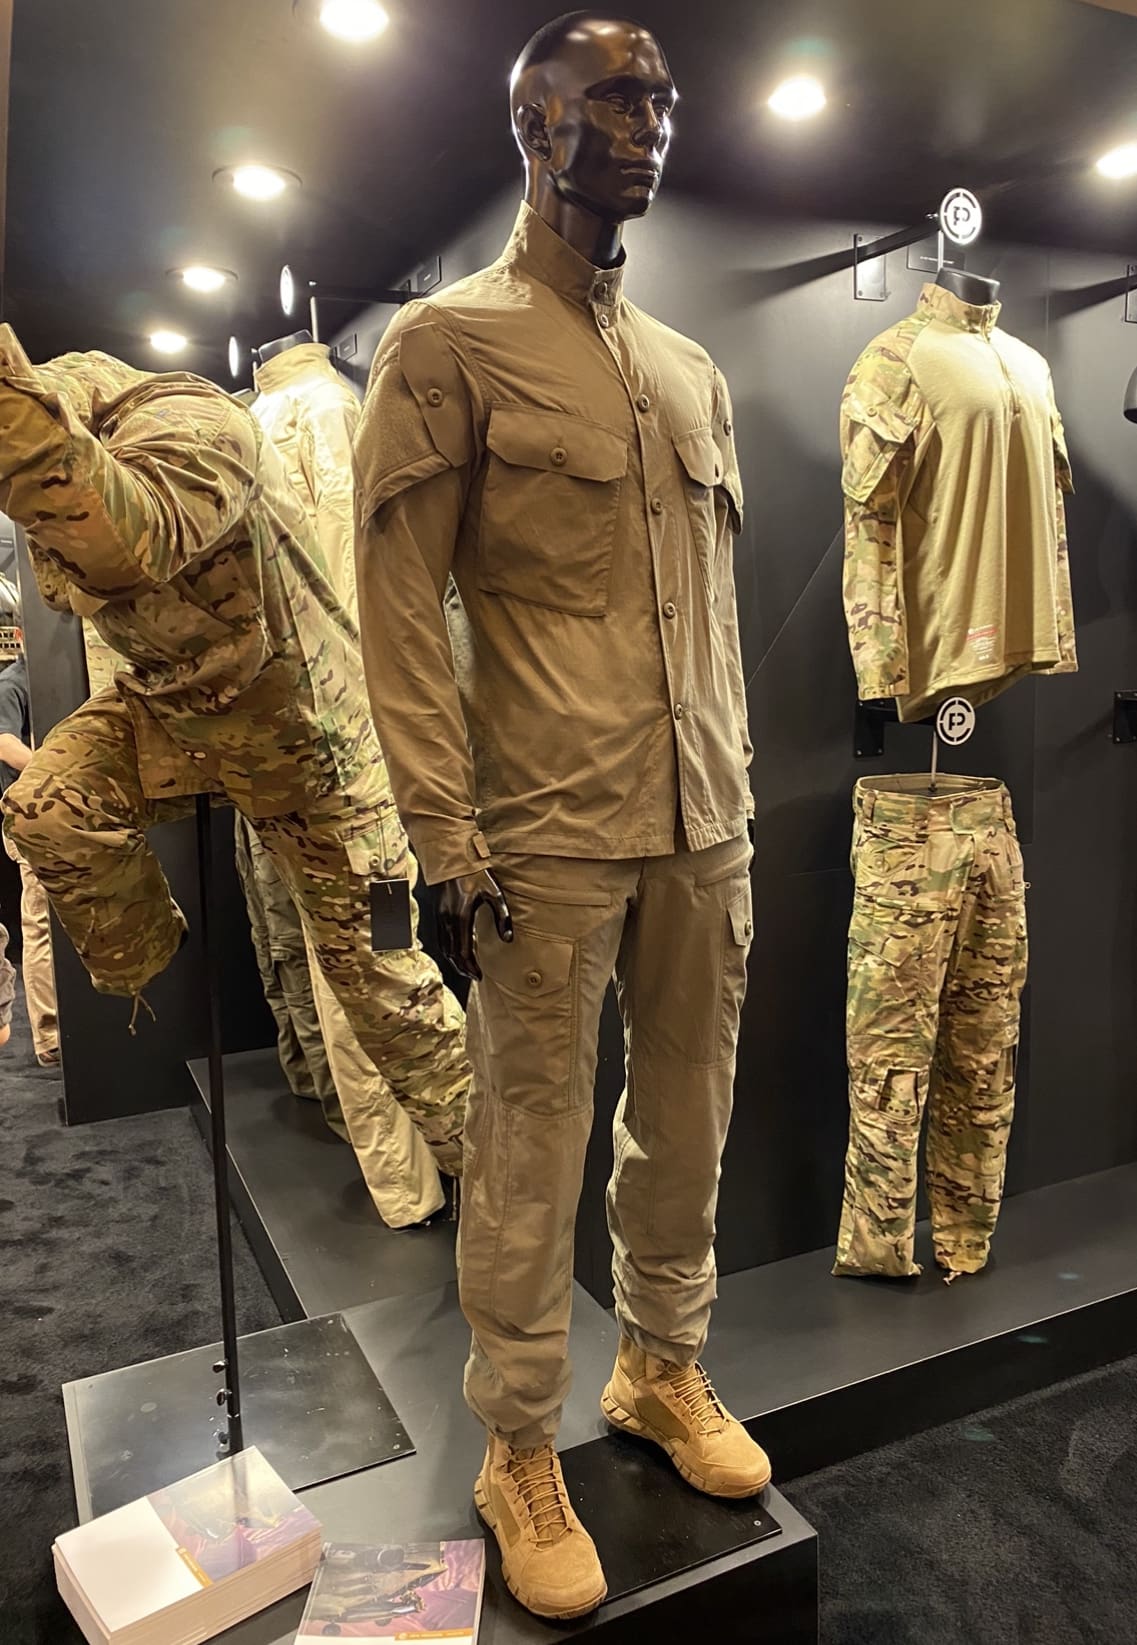 Clothing Archives - Page 10 of 289 - Soldier Systems Daily